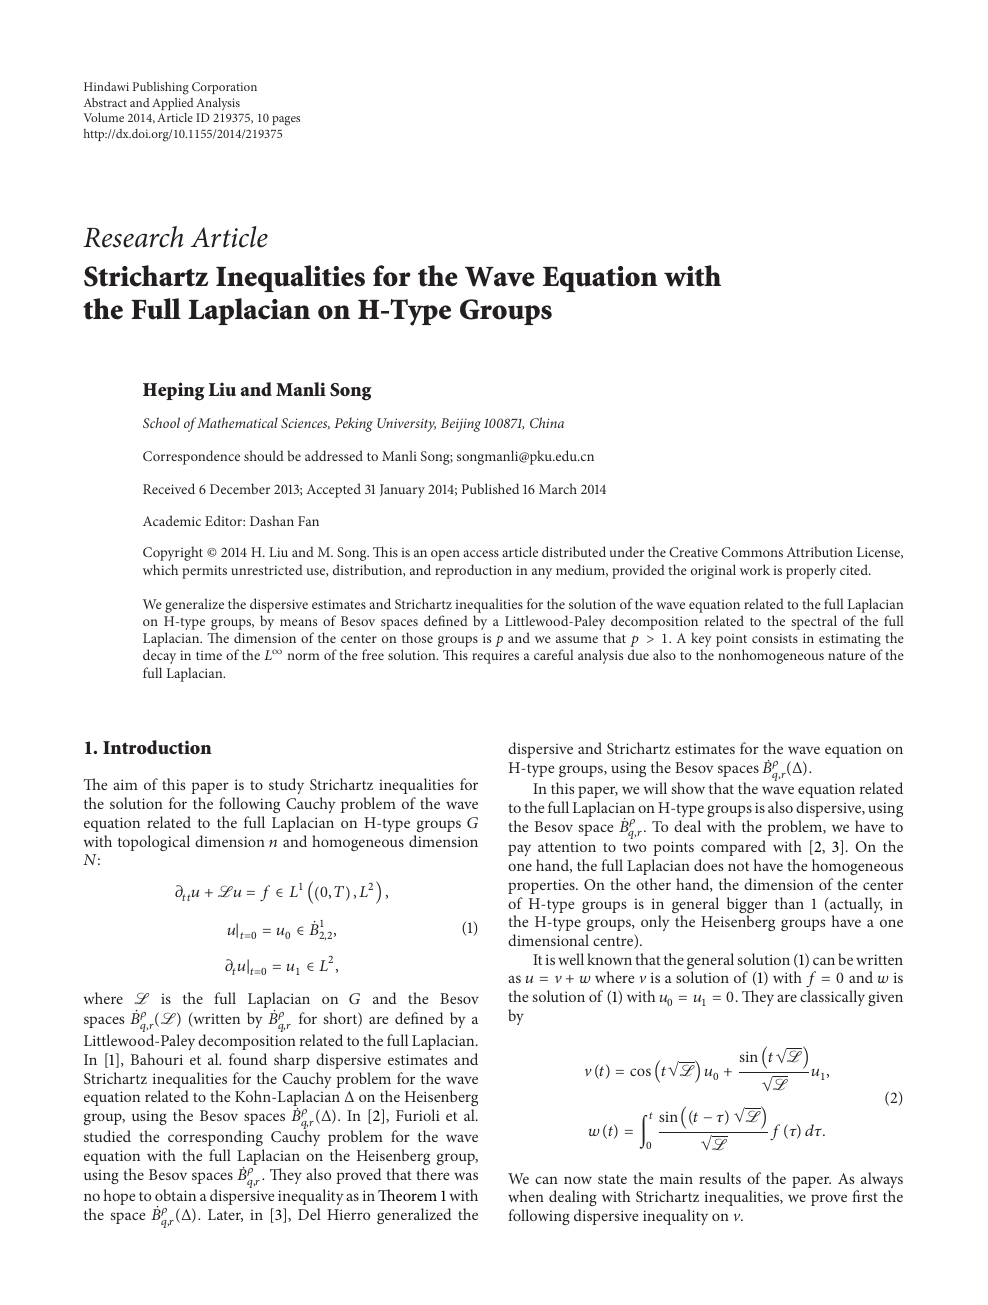 Strichartz Inequalities For The Wave Equation With The Full Laplacian On H Type Groups Topic Of Research Paper In Mathematics Download Scholarly Article Pdf And Read For Free On Cyberleninka Open Science